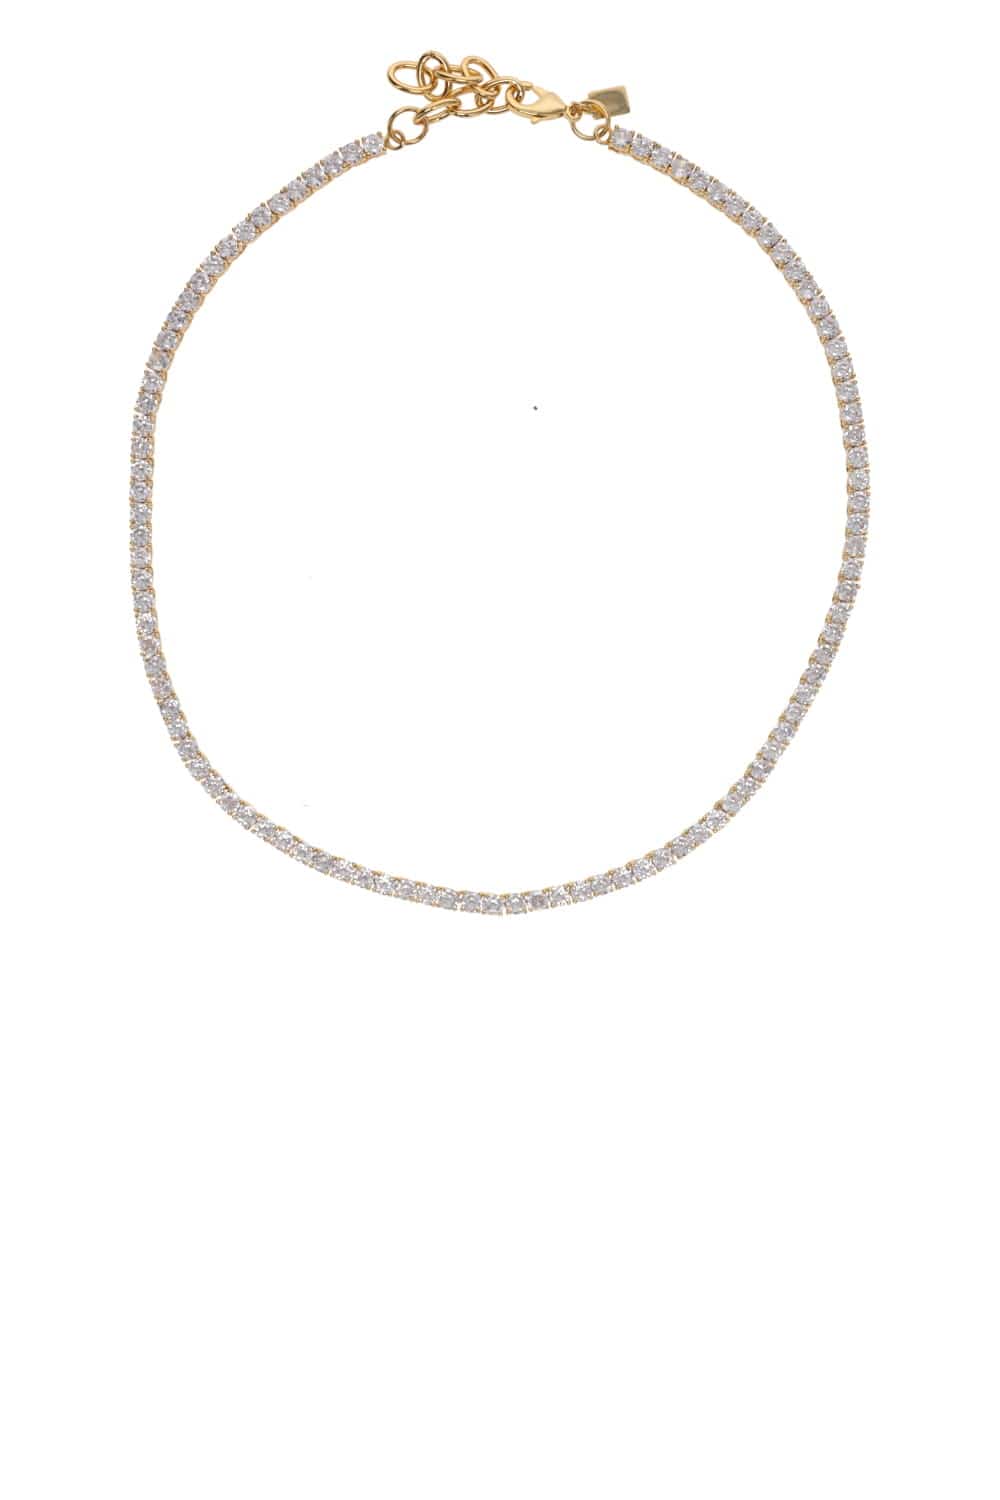 Crystal Haze Jewelry Serena Clear Crystal Tennis Necklace